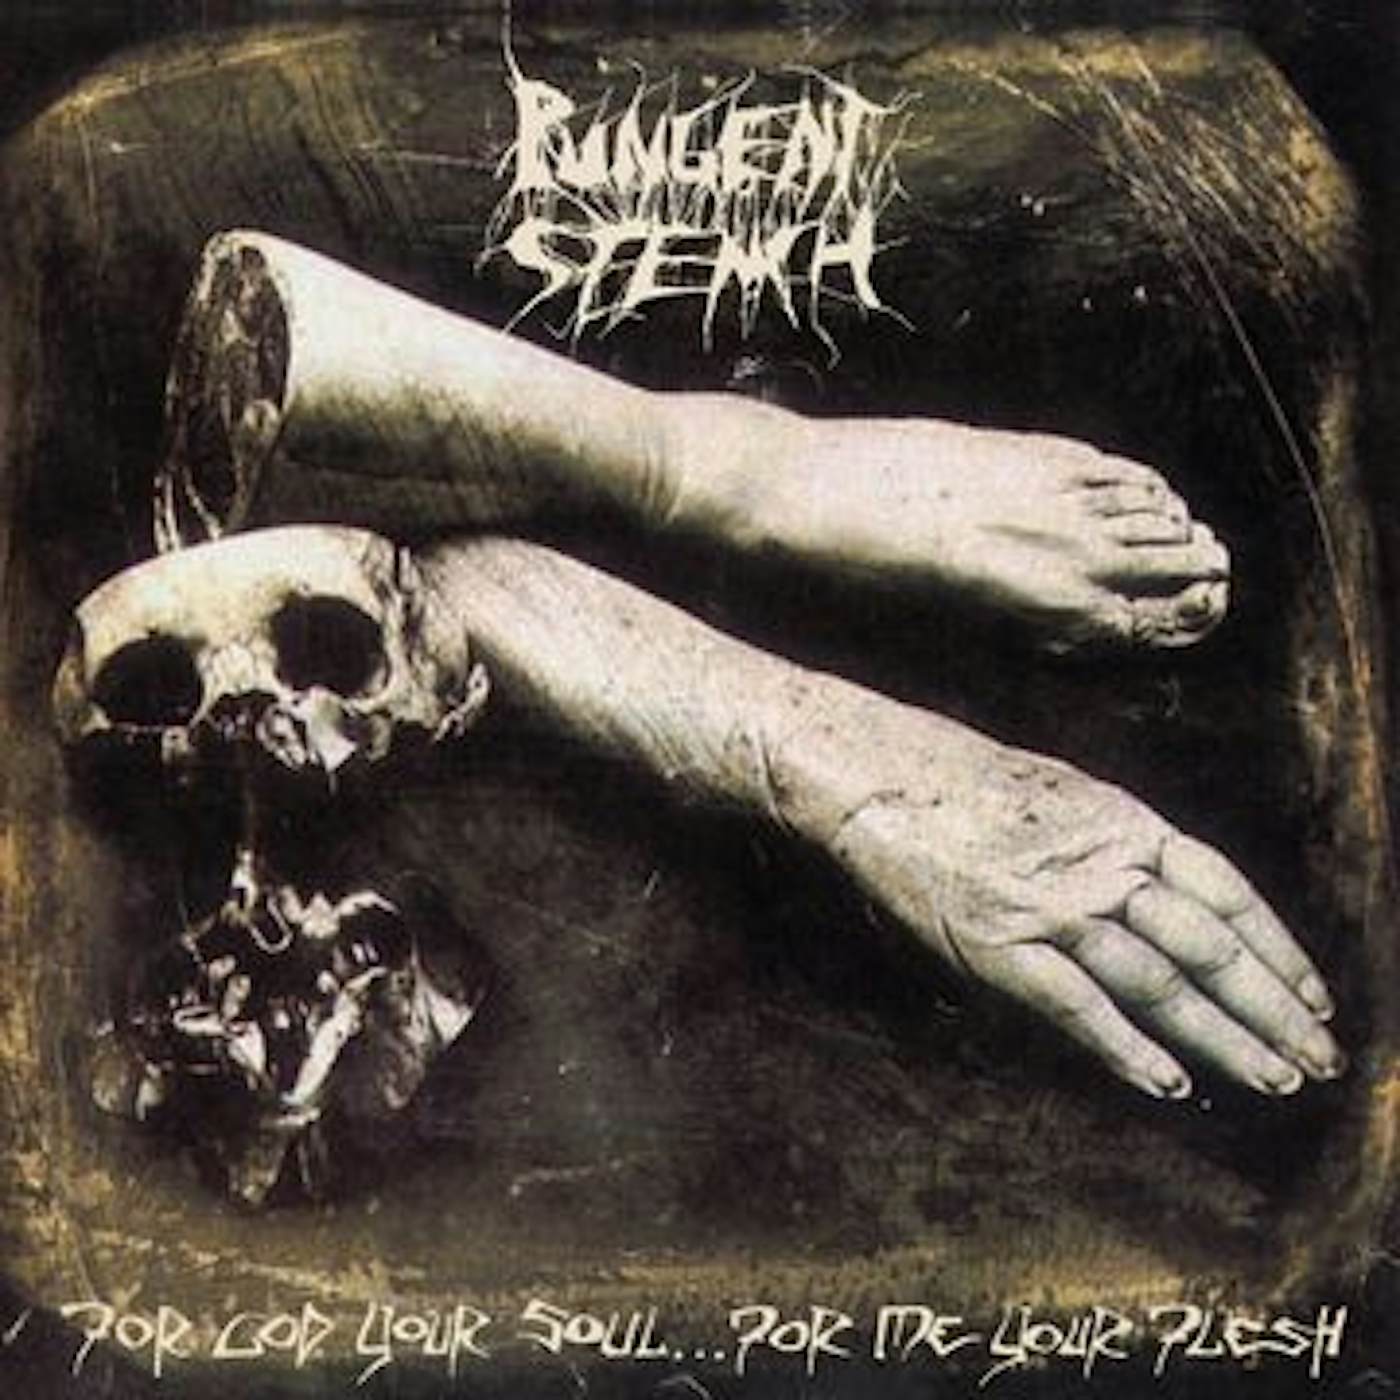 Pungent Stench FOR GOD YOUR SOUL FOR ME YOUR FLESH Vinyl Record